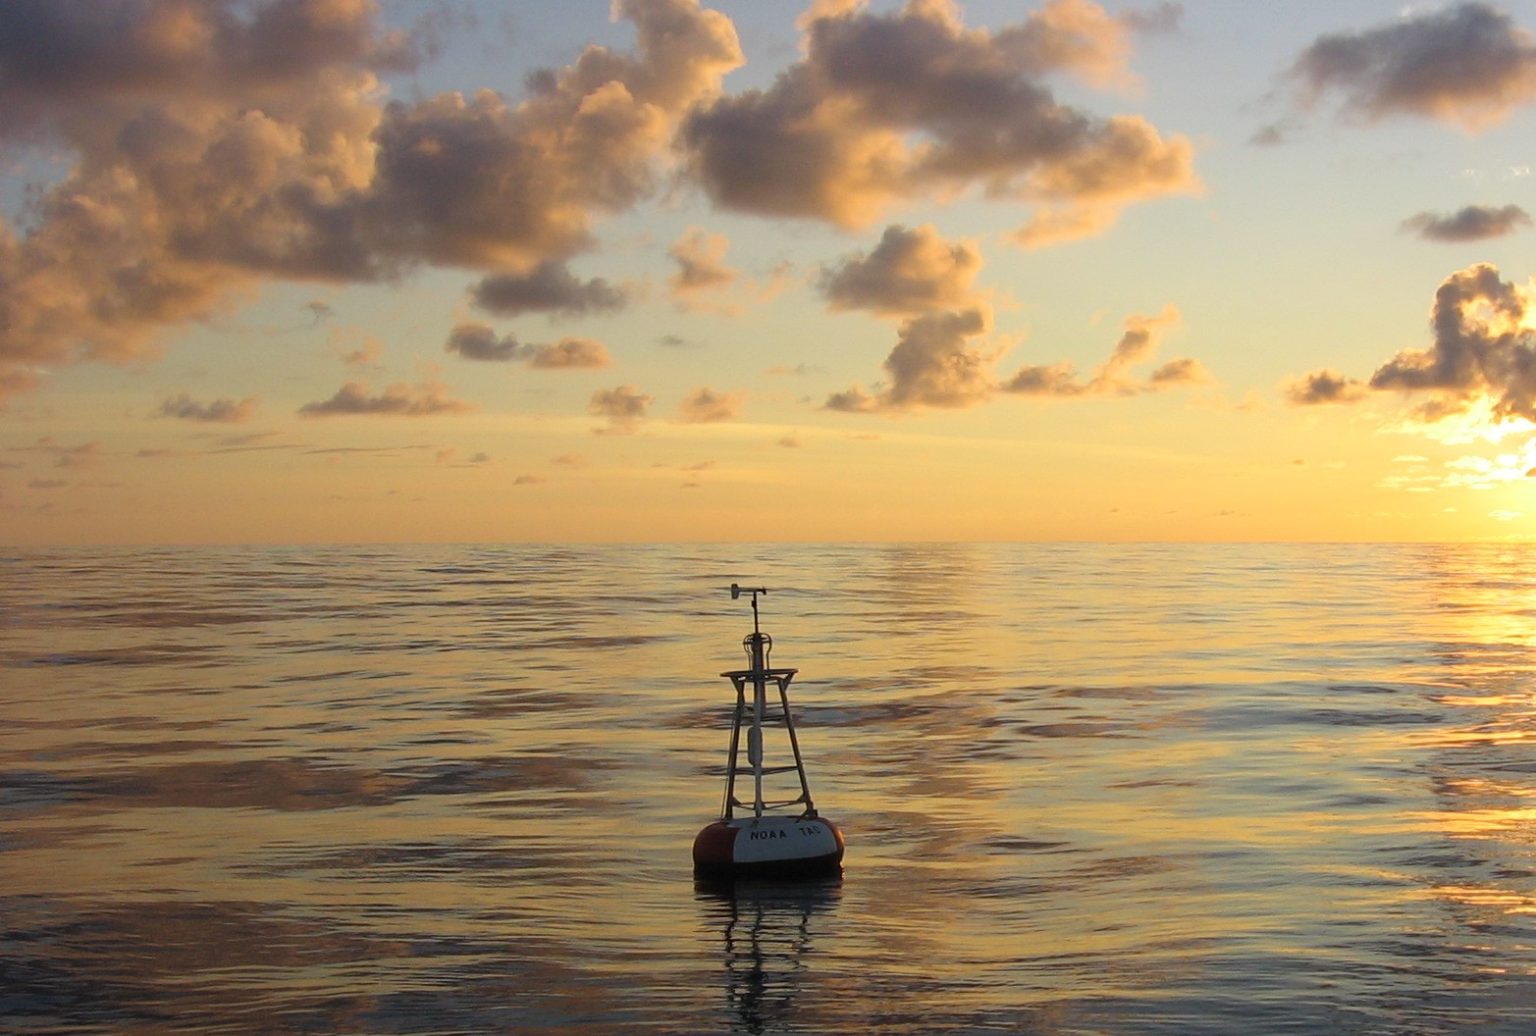 Moored buoy collecting atmospheric and oceanic data in the tropical pacific to improve our understanding of climate and weather. Credit: NOAA PMEL